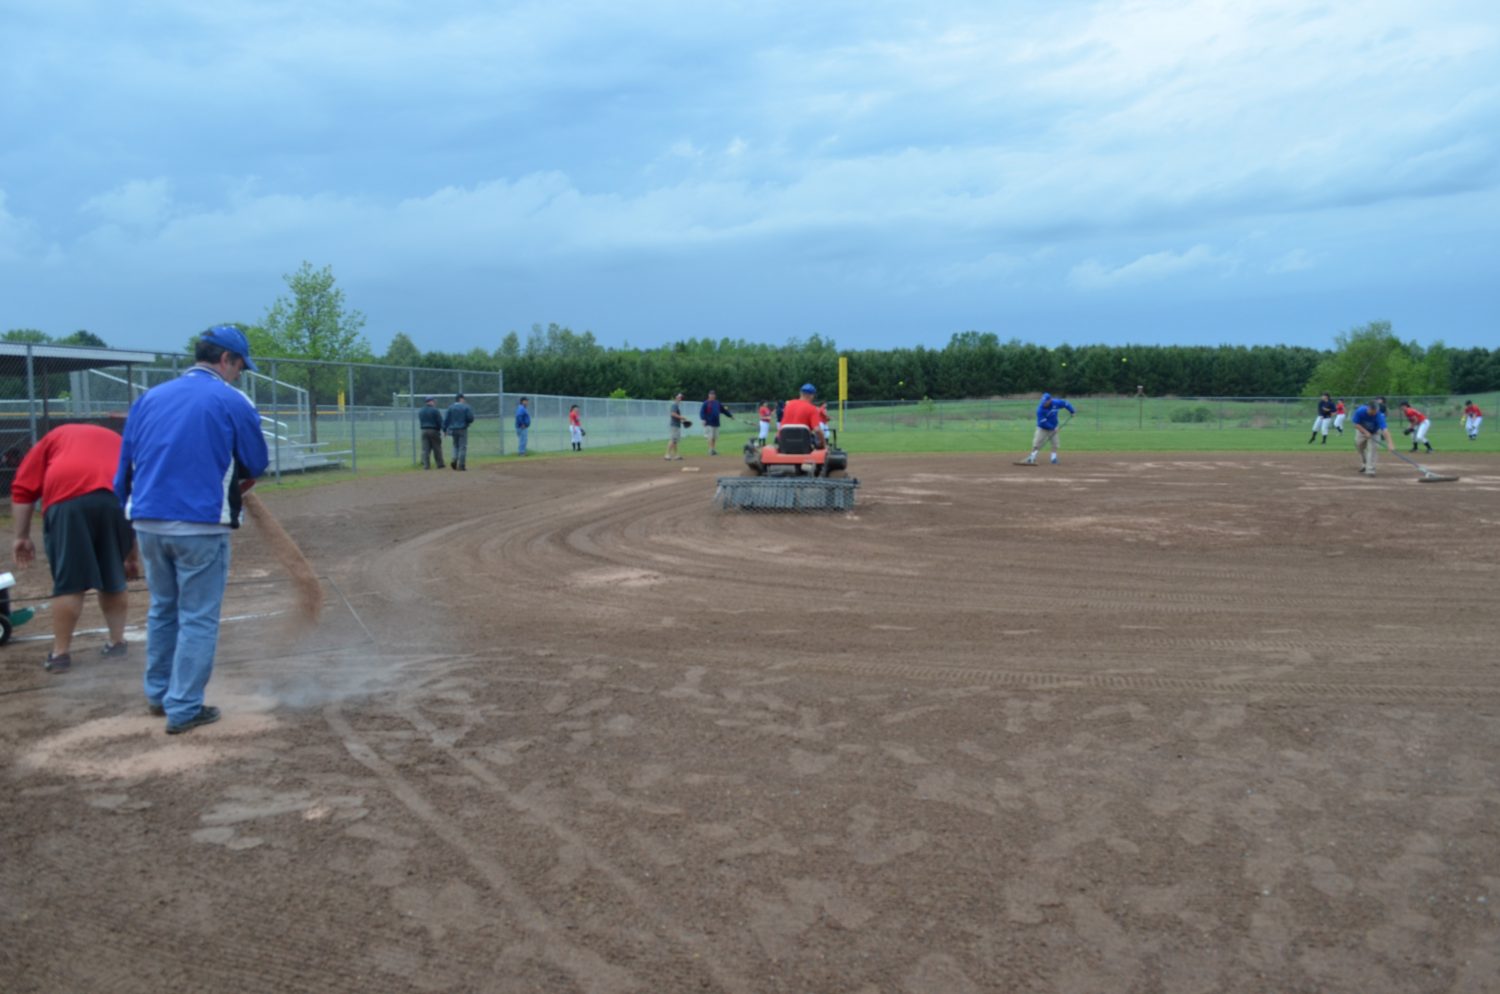 After weather delays, Bluejay softball edges out win over Gale-Ettrick-Trempealeau